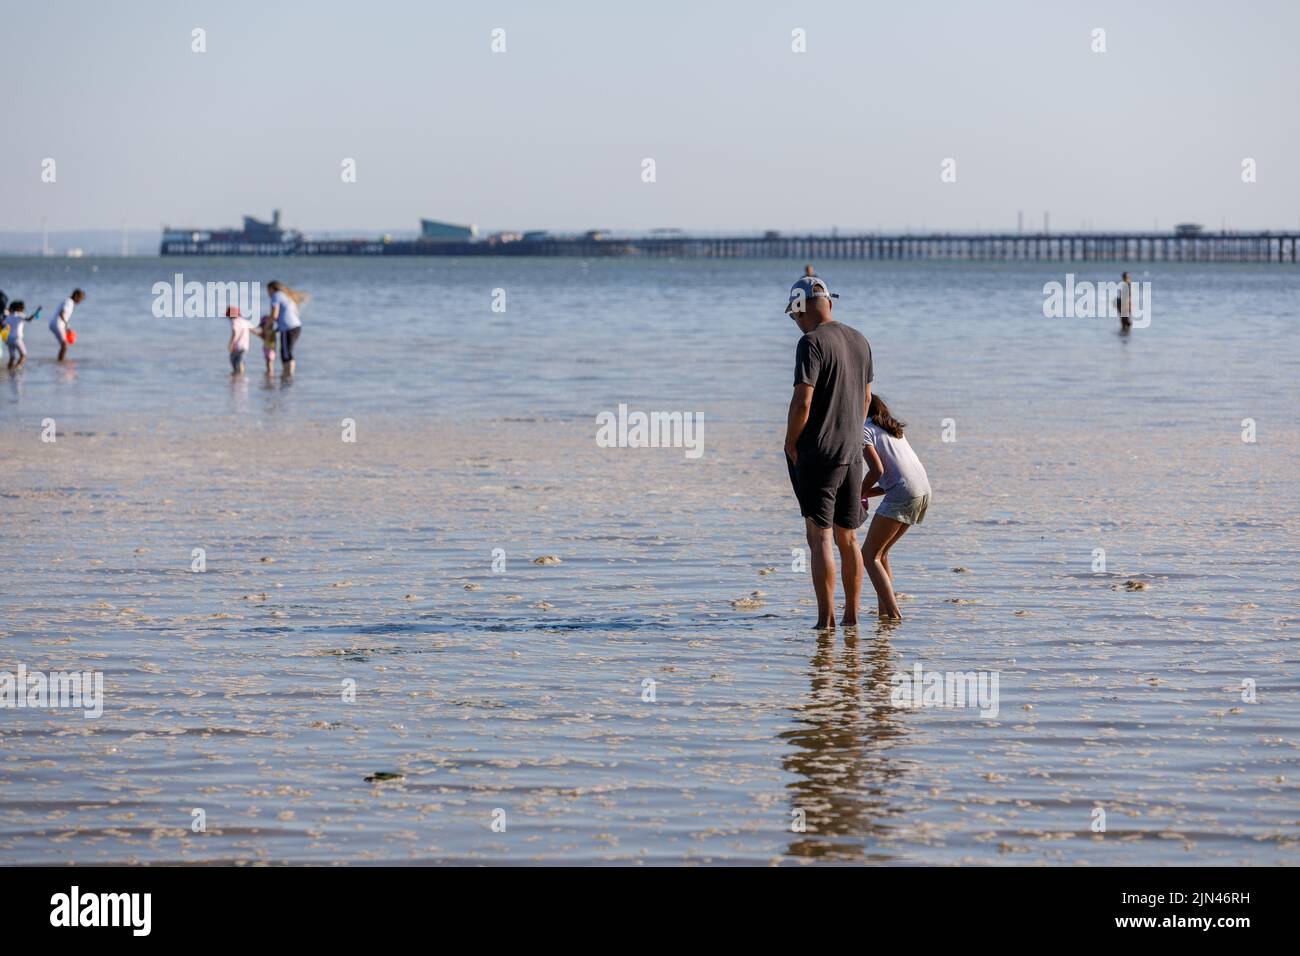 Heatwave UK. Pollution. Father and daughter in the sea at the beach with algae foam spume all around caused by hot weather and pollutants Stock Photo